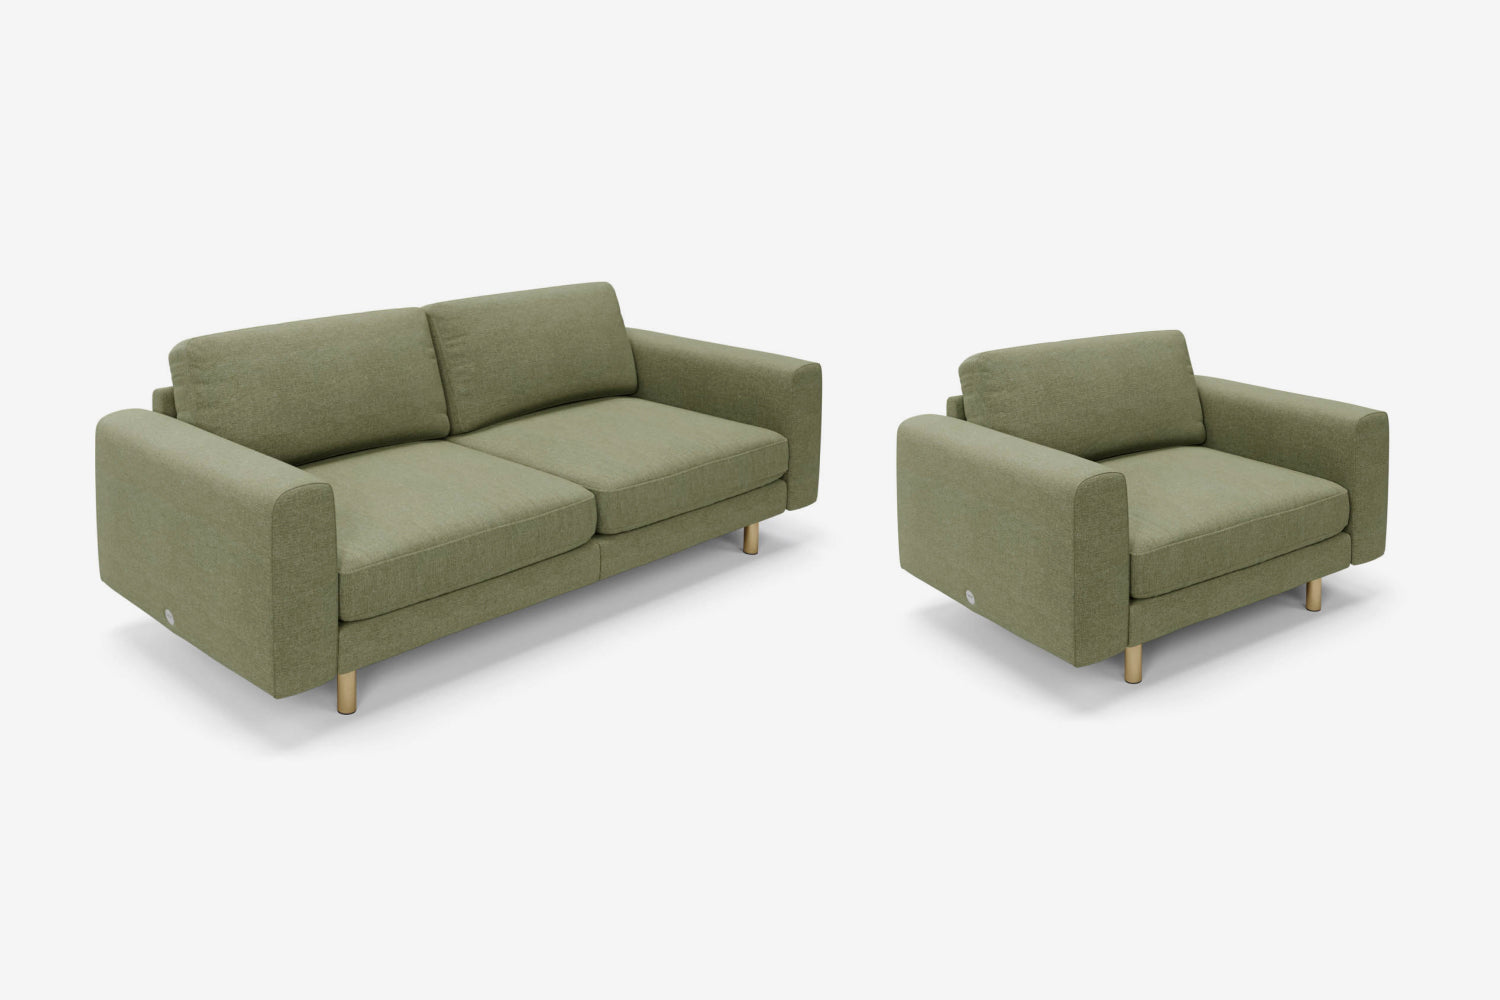 The Big Chill - 3 Seater Sofa and 1.5 Seater Snuggler Set - Sage